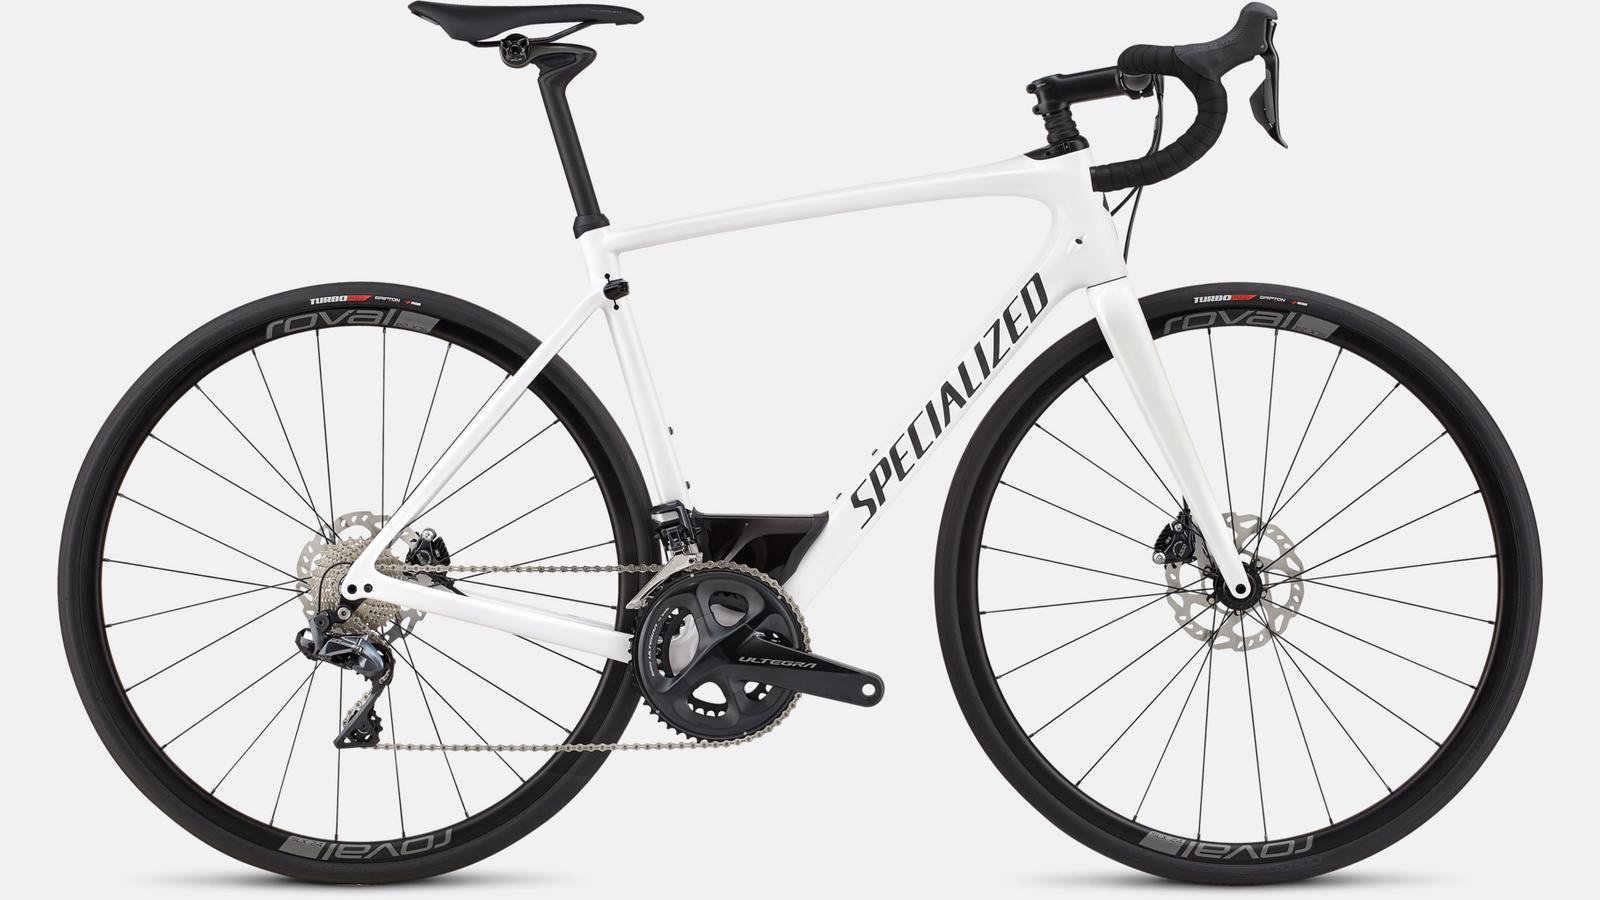 Paint for 2018 Specialized Roubaix Expert Ultegra Di2 - Gloss Metallic White Silver